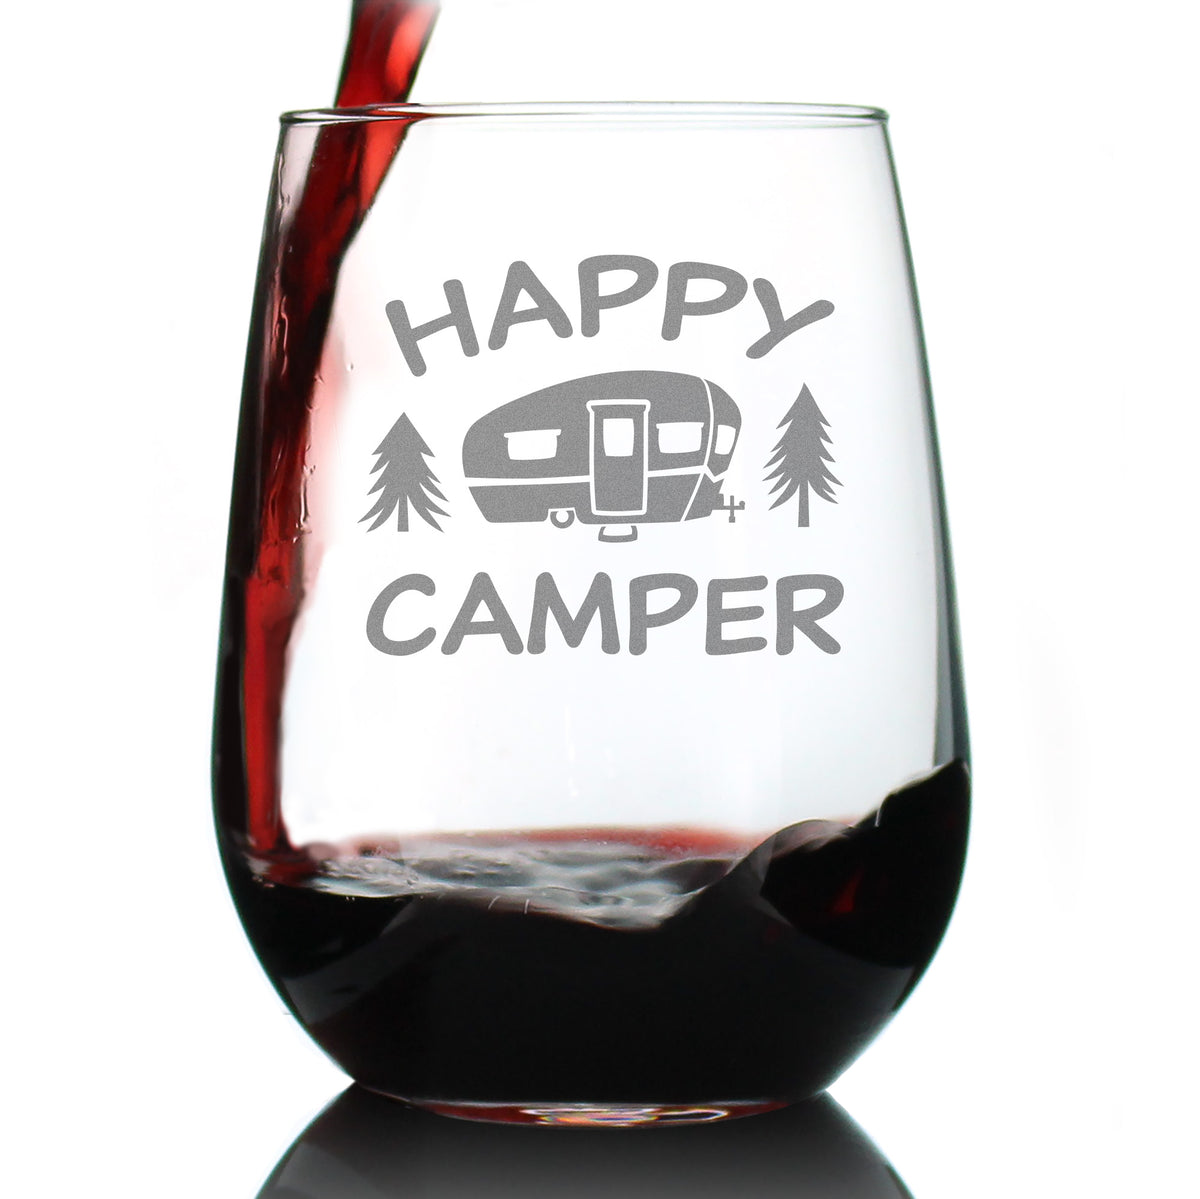 Happy Camper - Funny Stemless Wine Glass - Cute Camping Gifts - Large Glasses - Fun RV Accessories for Women and Men